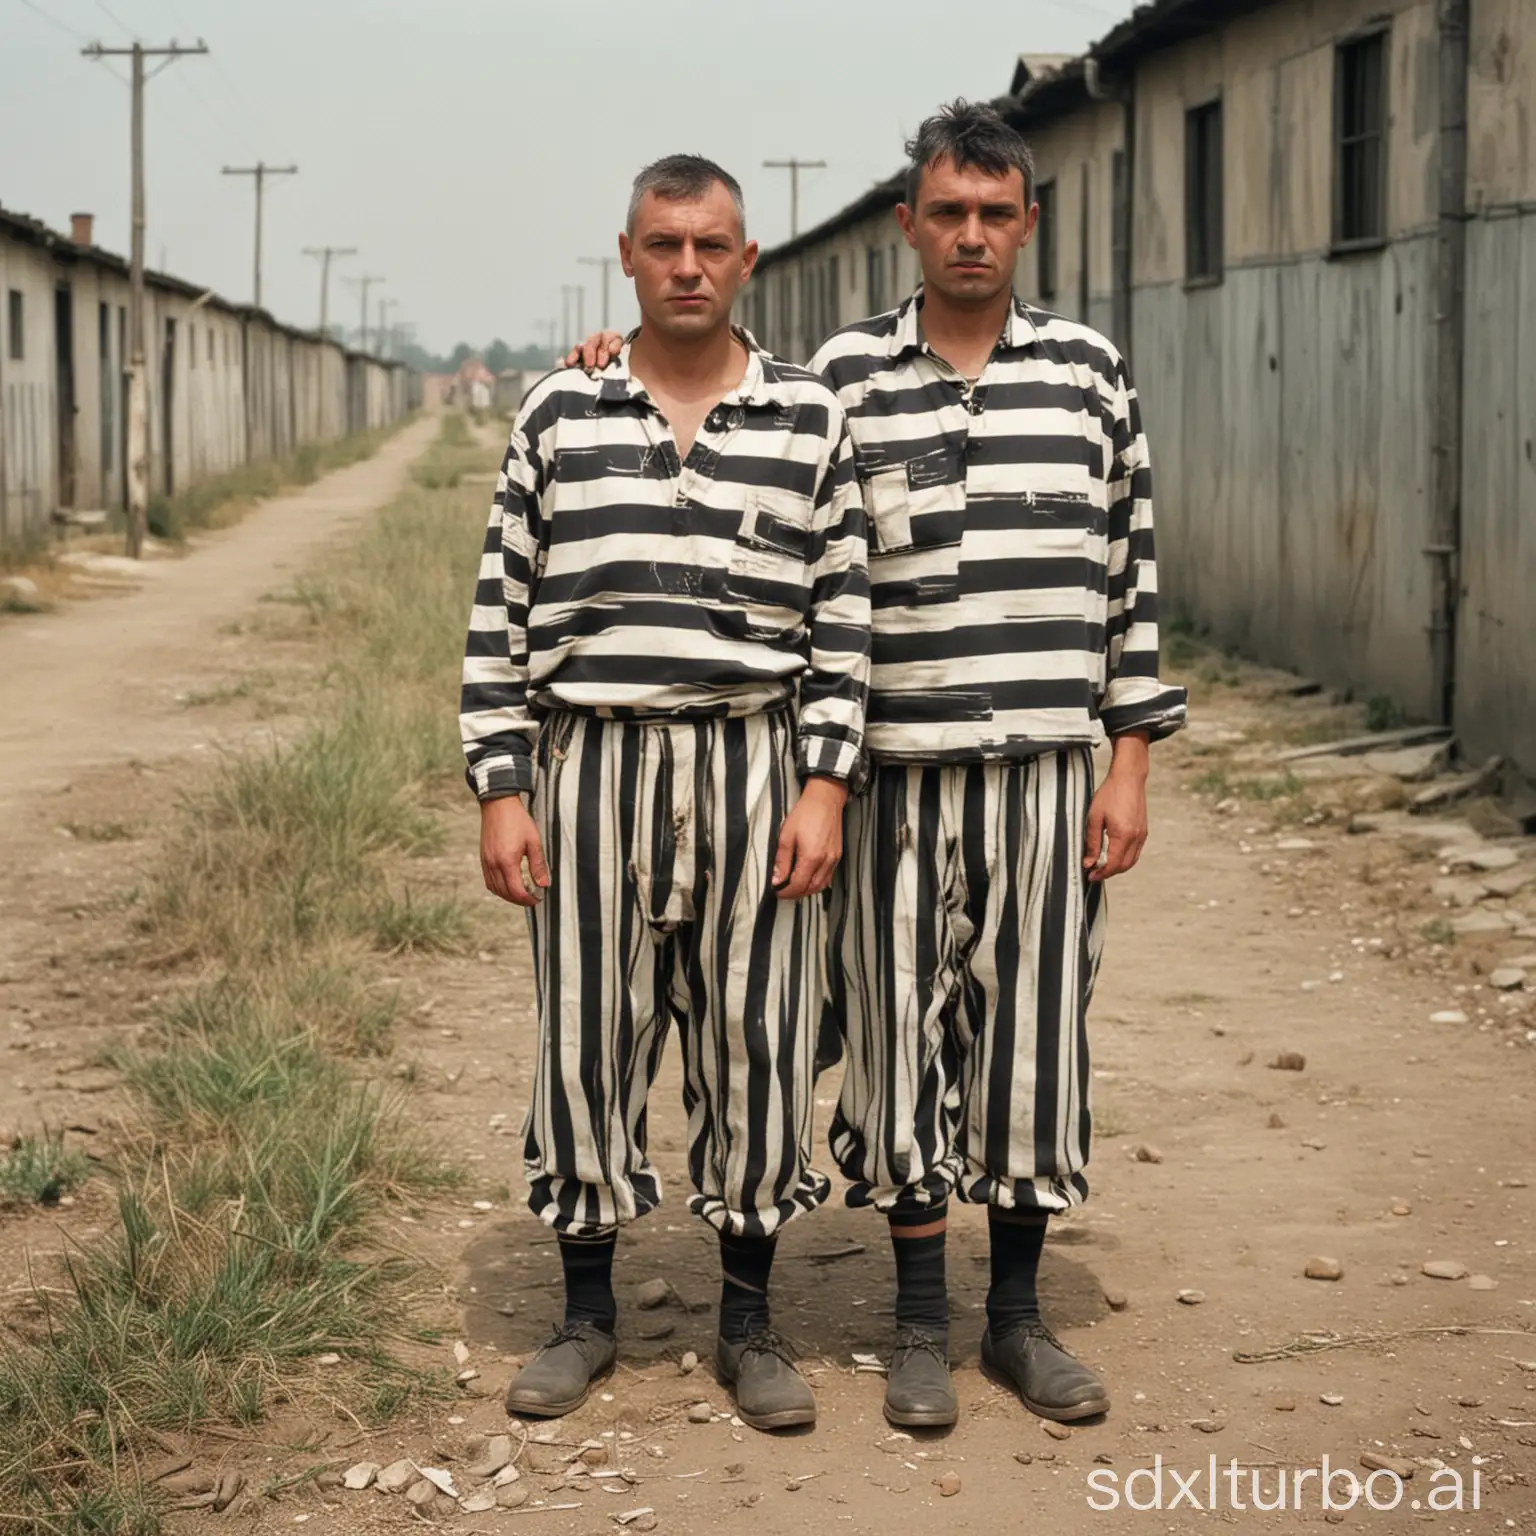 Survivors-of-Concentration-Camps-in-Striped-Clothing